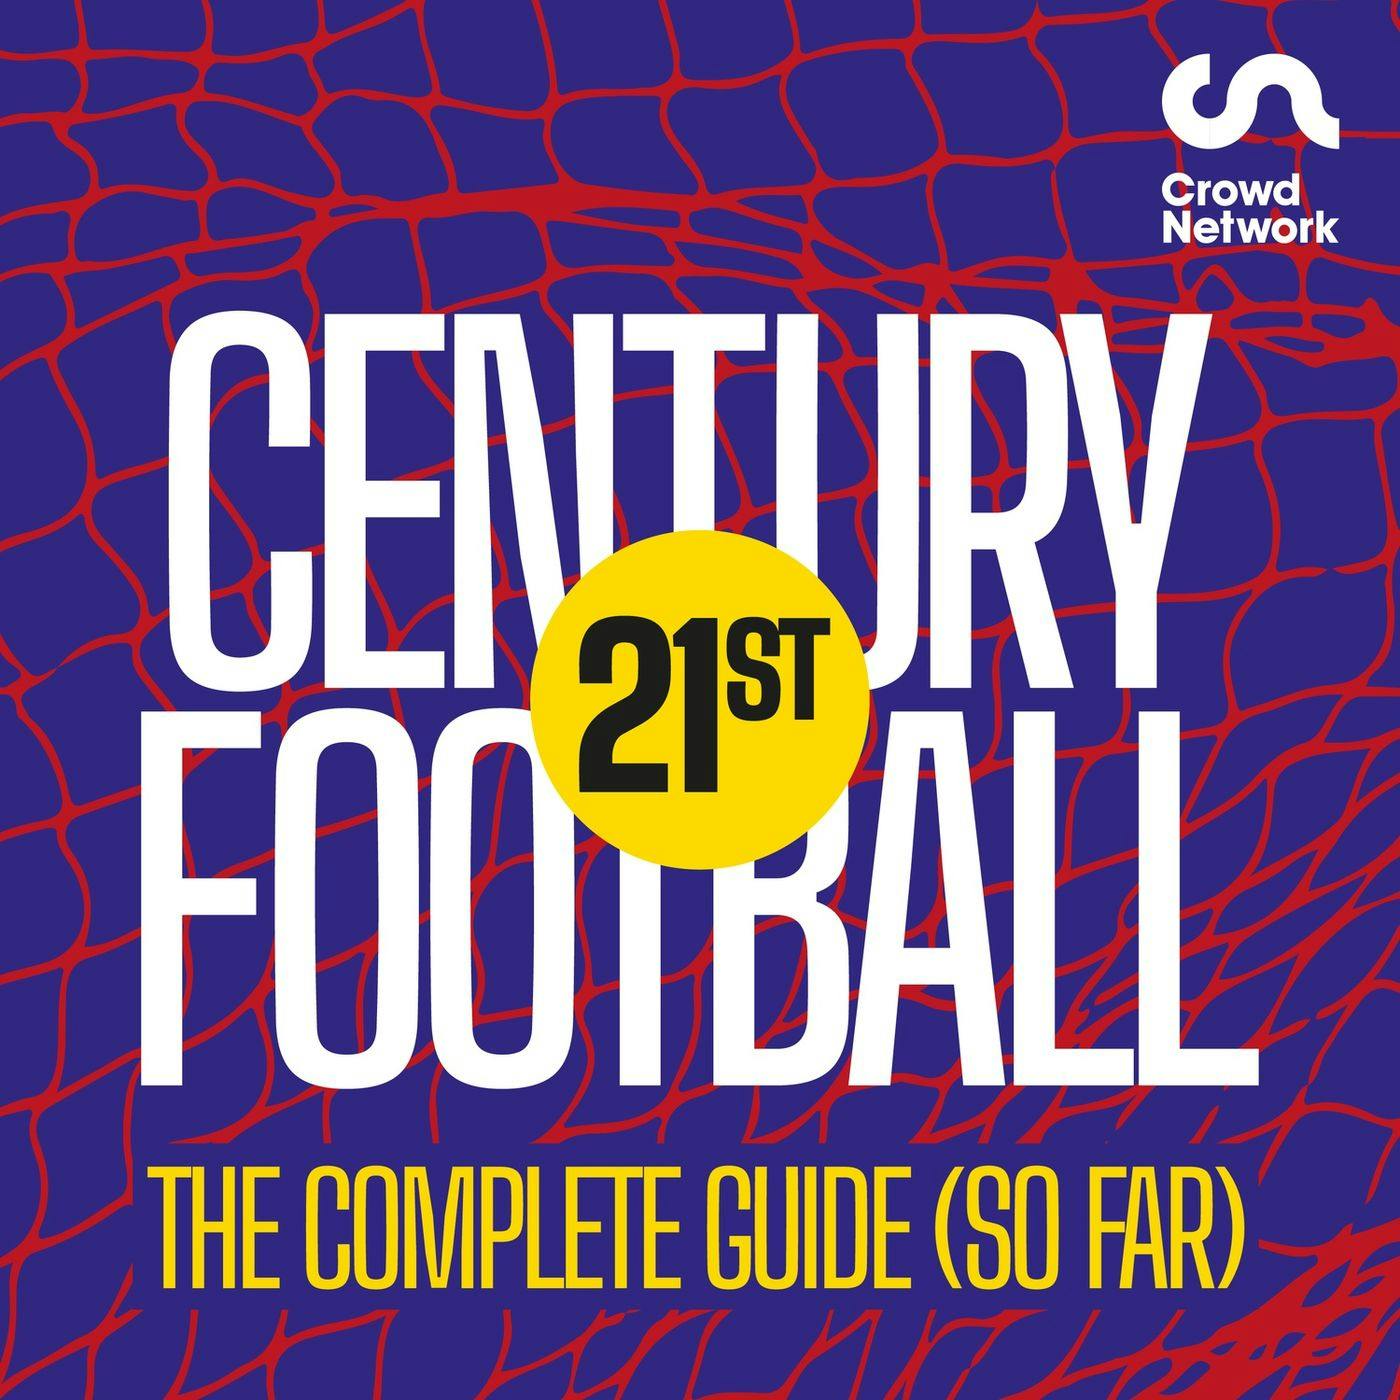 21st Century Football: The Complete Guide (so far)